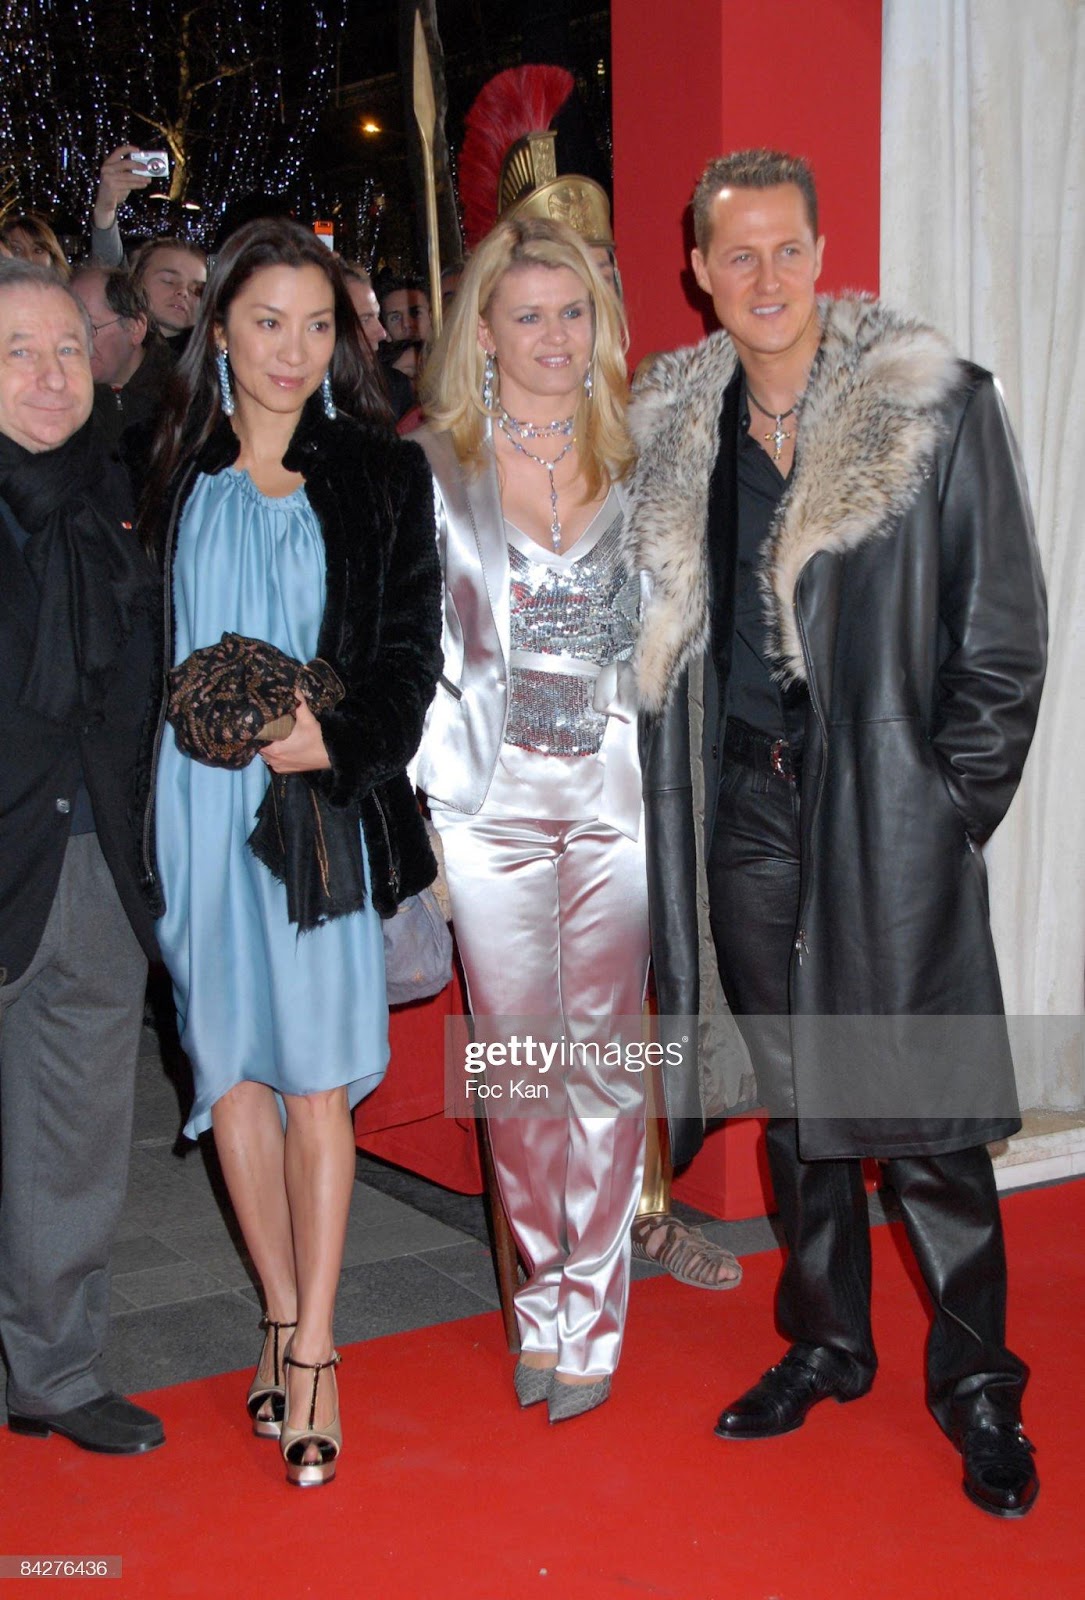 Jean Todt, Michelle Yeoh, Corinna Schumacher and Michael Schumacher attend the Asterix at The Olympic Games Paris Premiere at The Gaumont Marignan on January 13, 2008 in Paris, France.